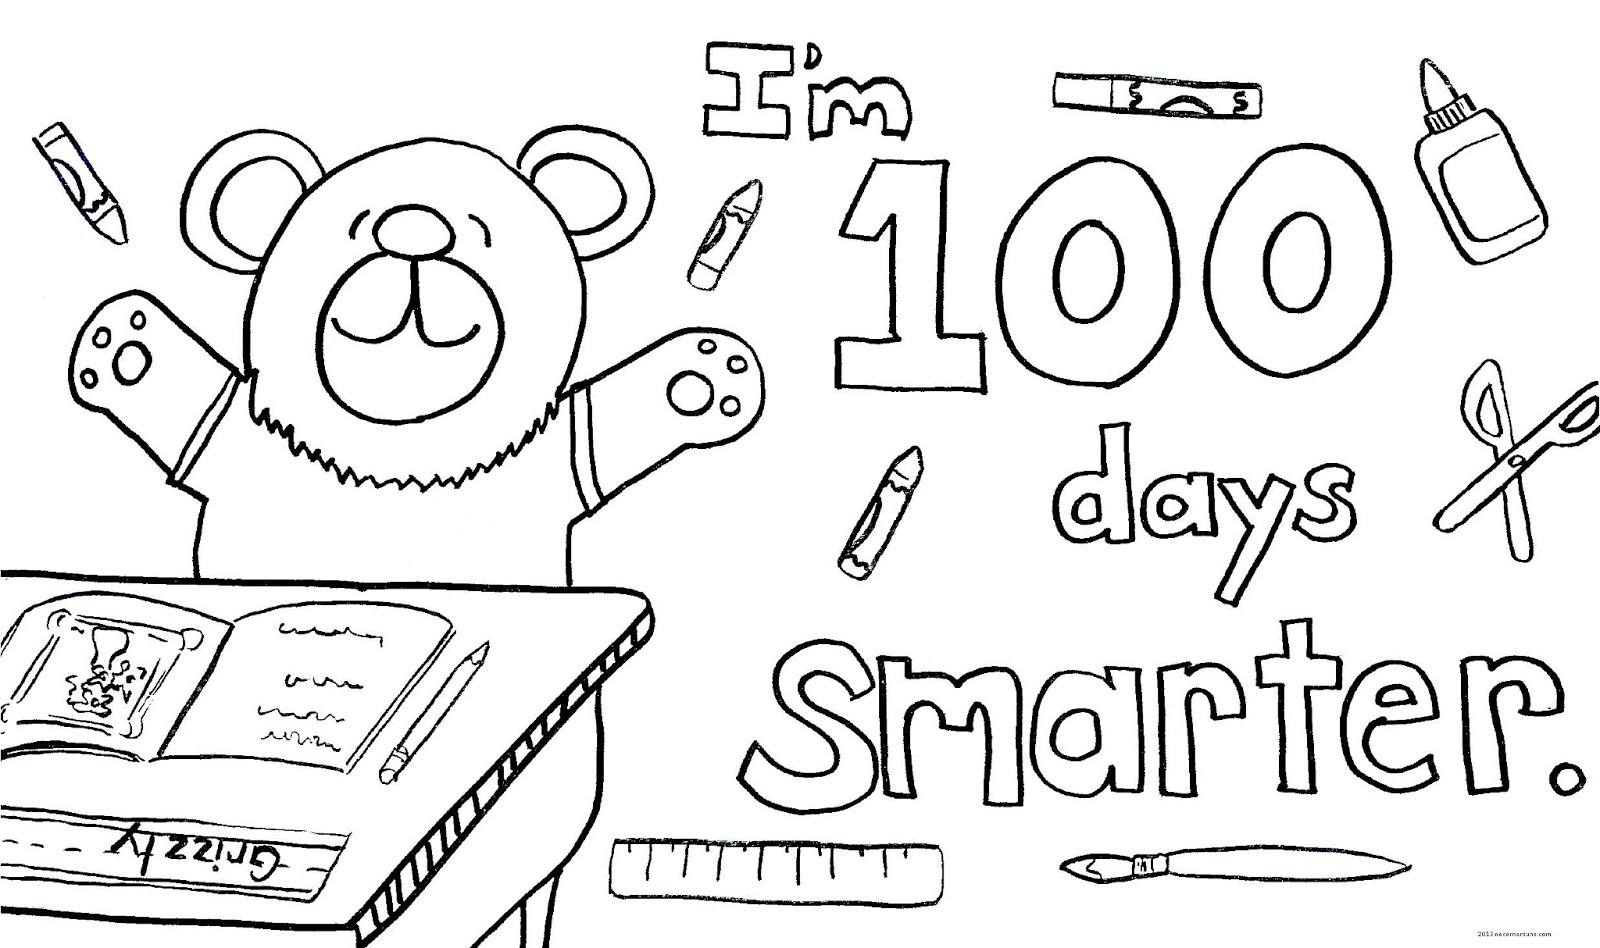 5-best-images-of-100-day-celebration-coloring-printables-free-100